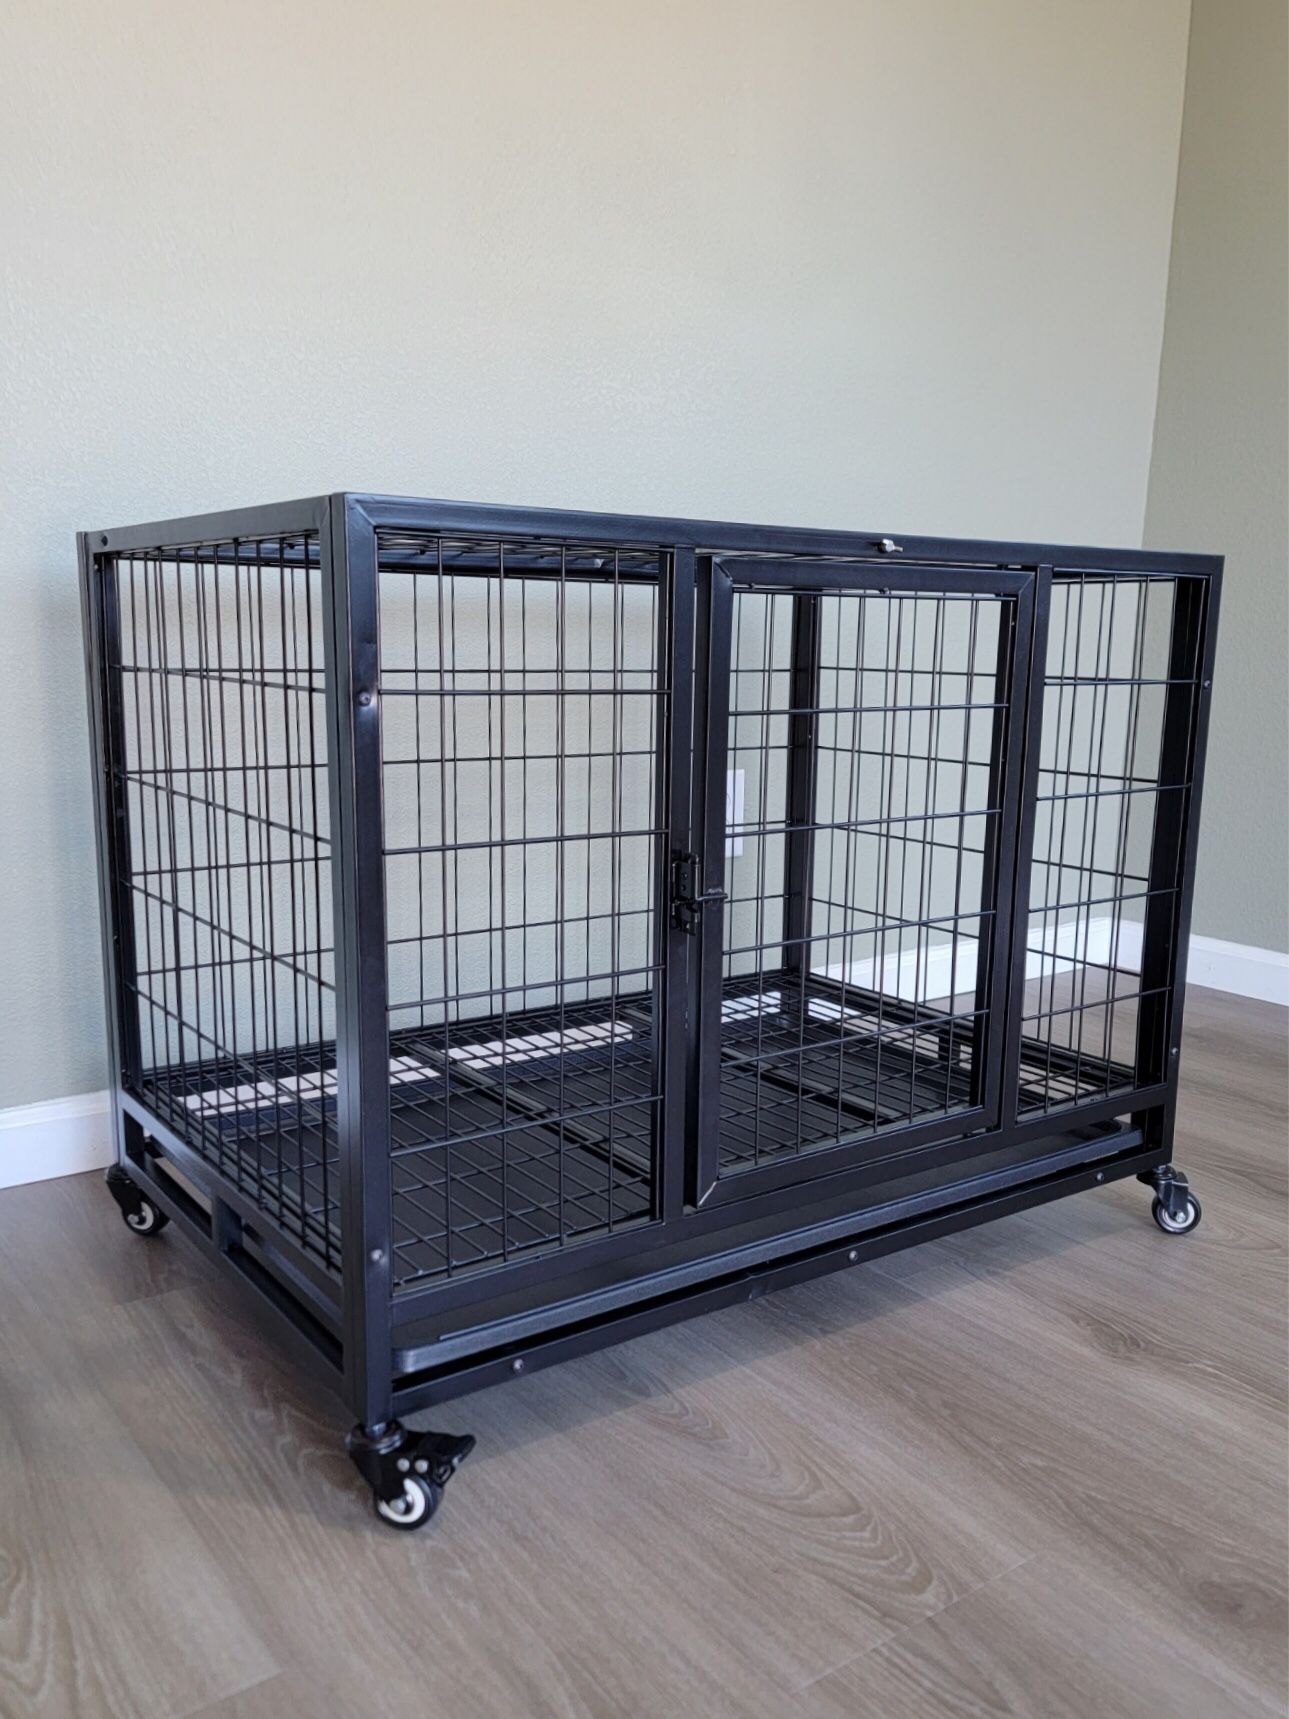 36" Medium Dog Cage Kennel with Single Door and Pull-Out Tray! (New) 📦 